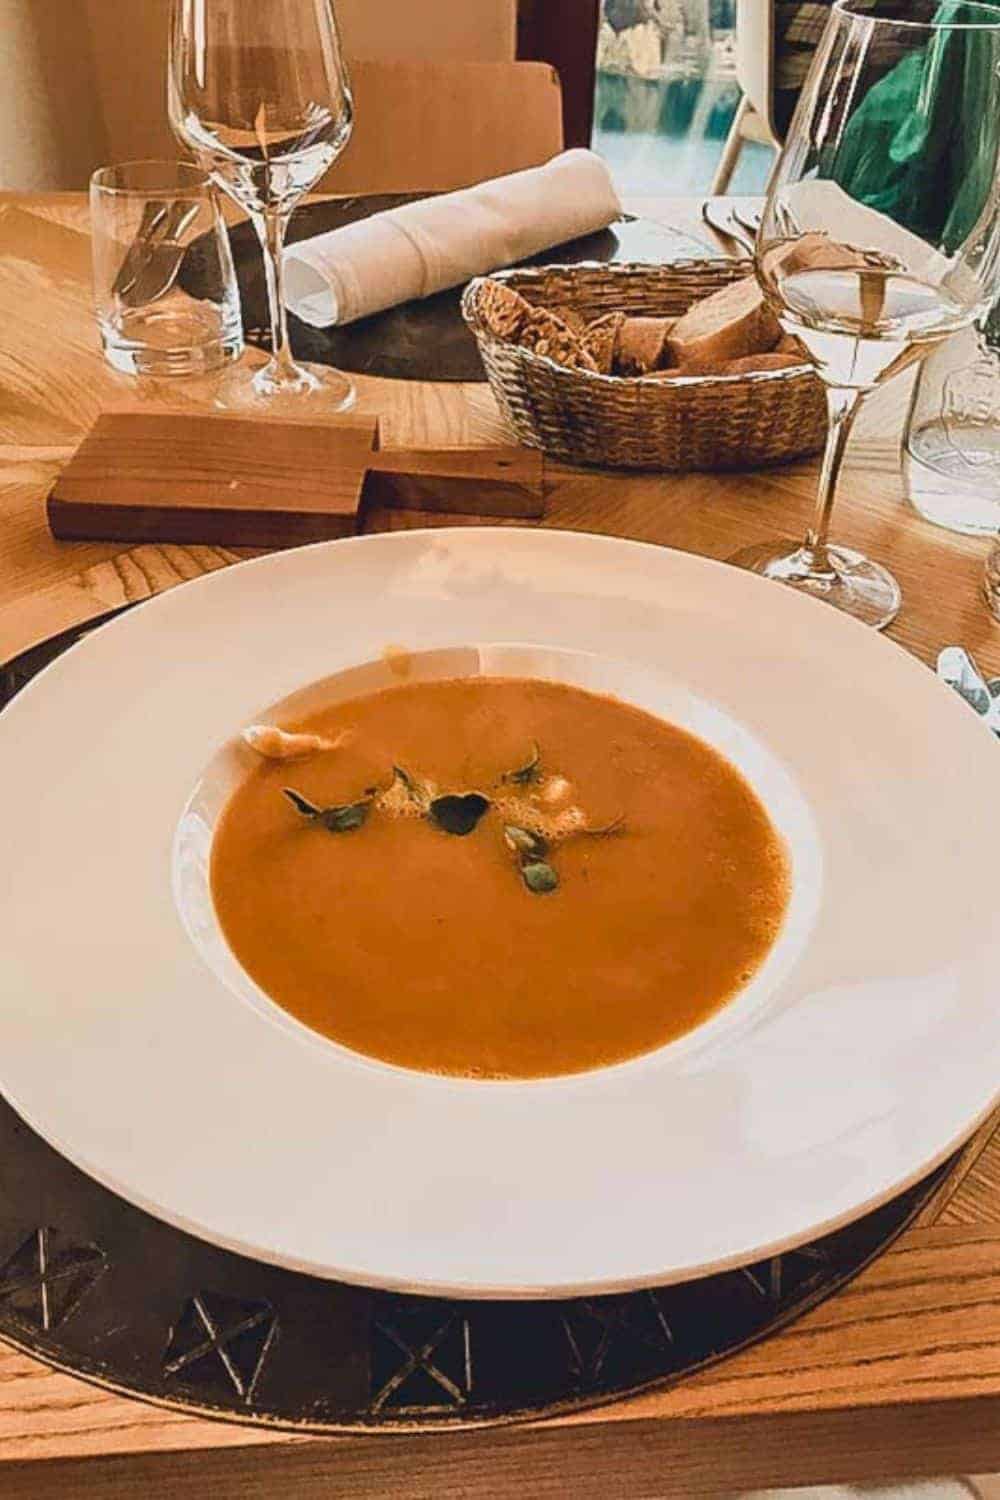 A bowl of rich, creamy soup served elegantly in a white bowl, paired with a basket of bread and a glass of white wine, ready for a gourmet experience